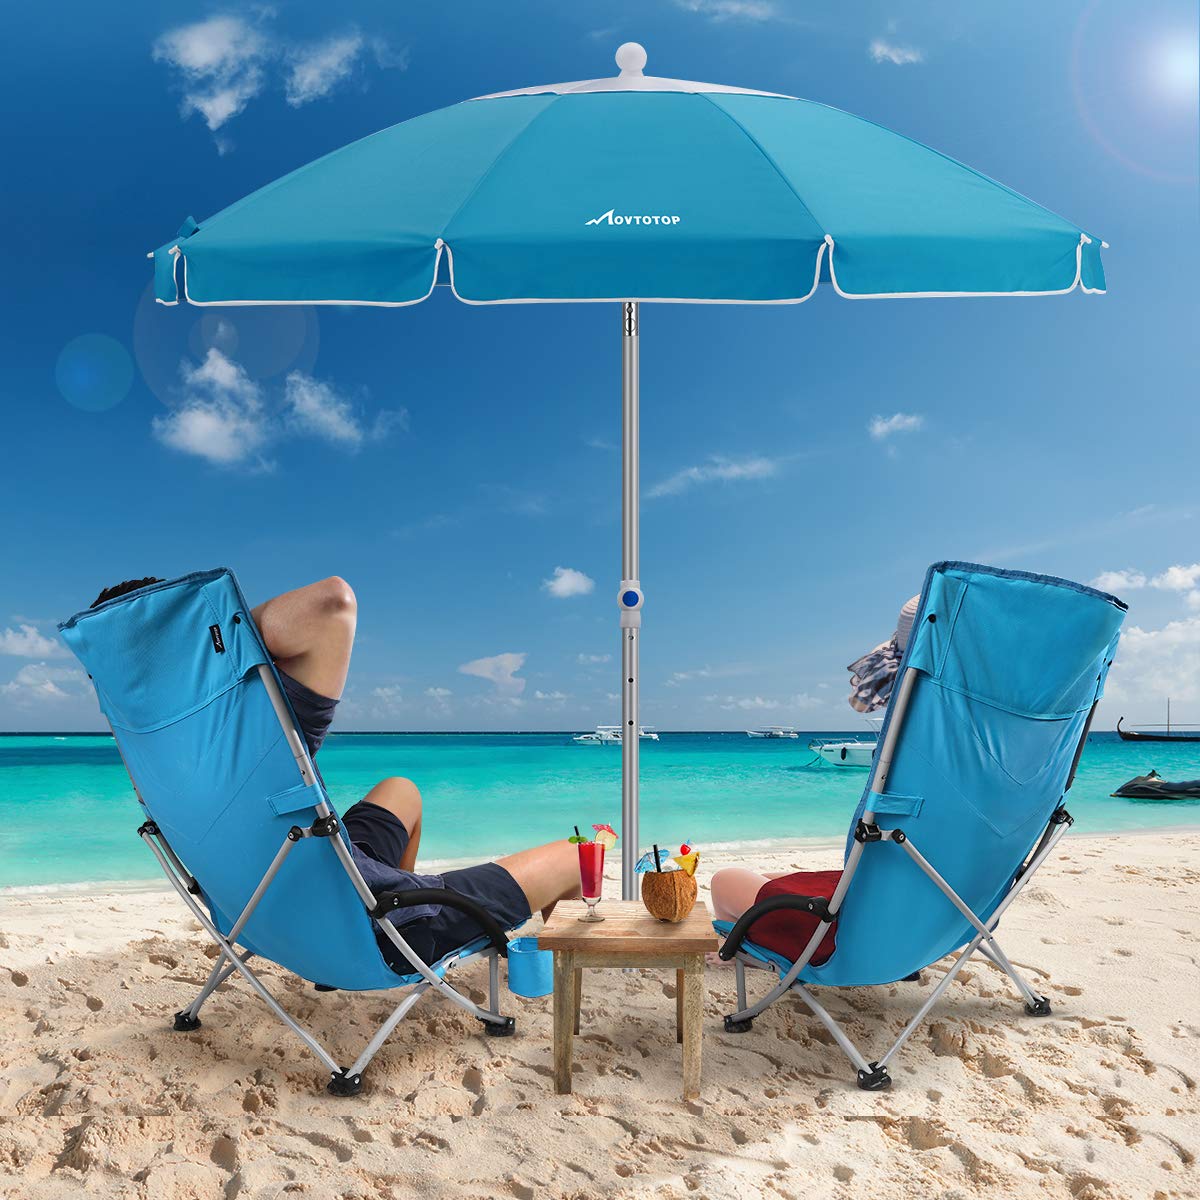 Top 10 Best Beach Chairs in 2021 Reviews Buyer's Guide